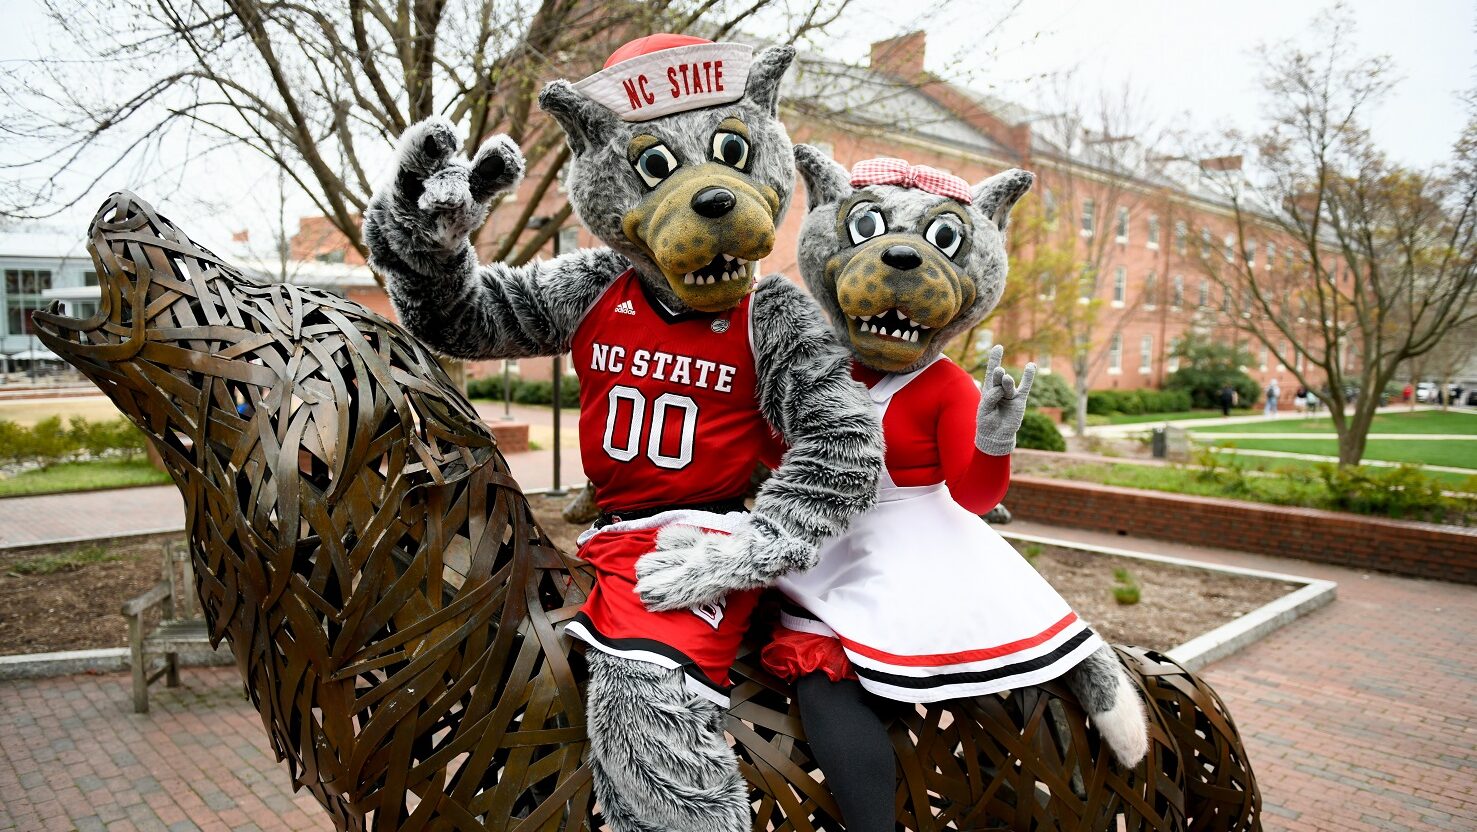 Mr. and Mrs Wuf - Win Big for Creating Digital Page - Forest Biomaterials NC State University